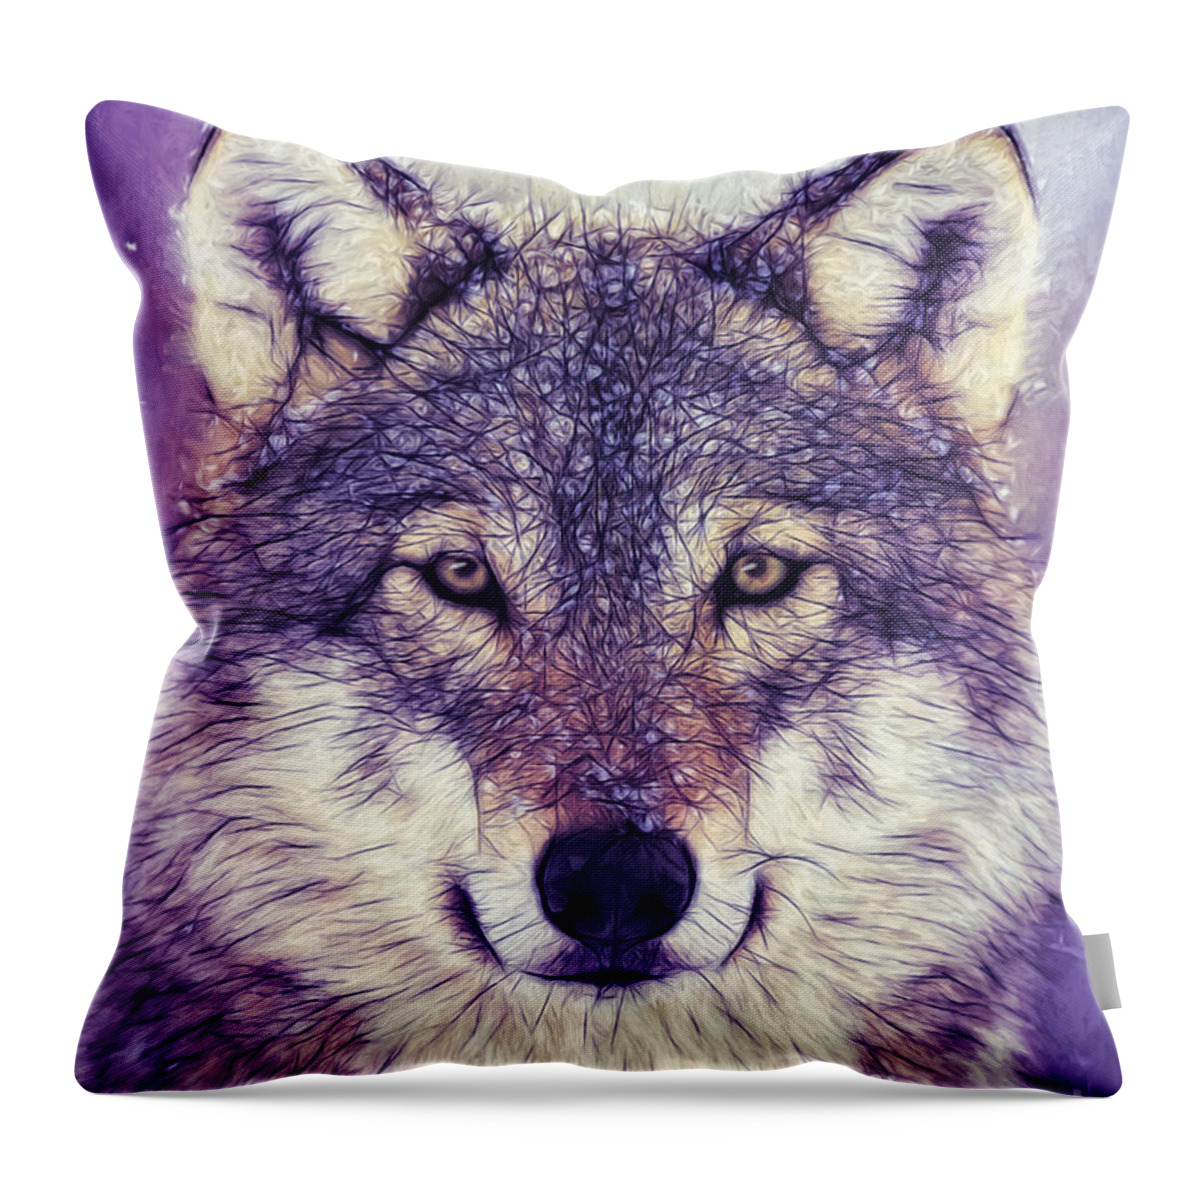 Wolf Throw Pillow featuring the digital art Wolf by Tim Wemple